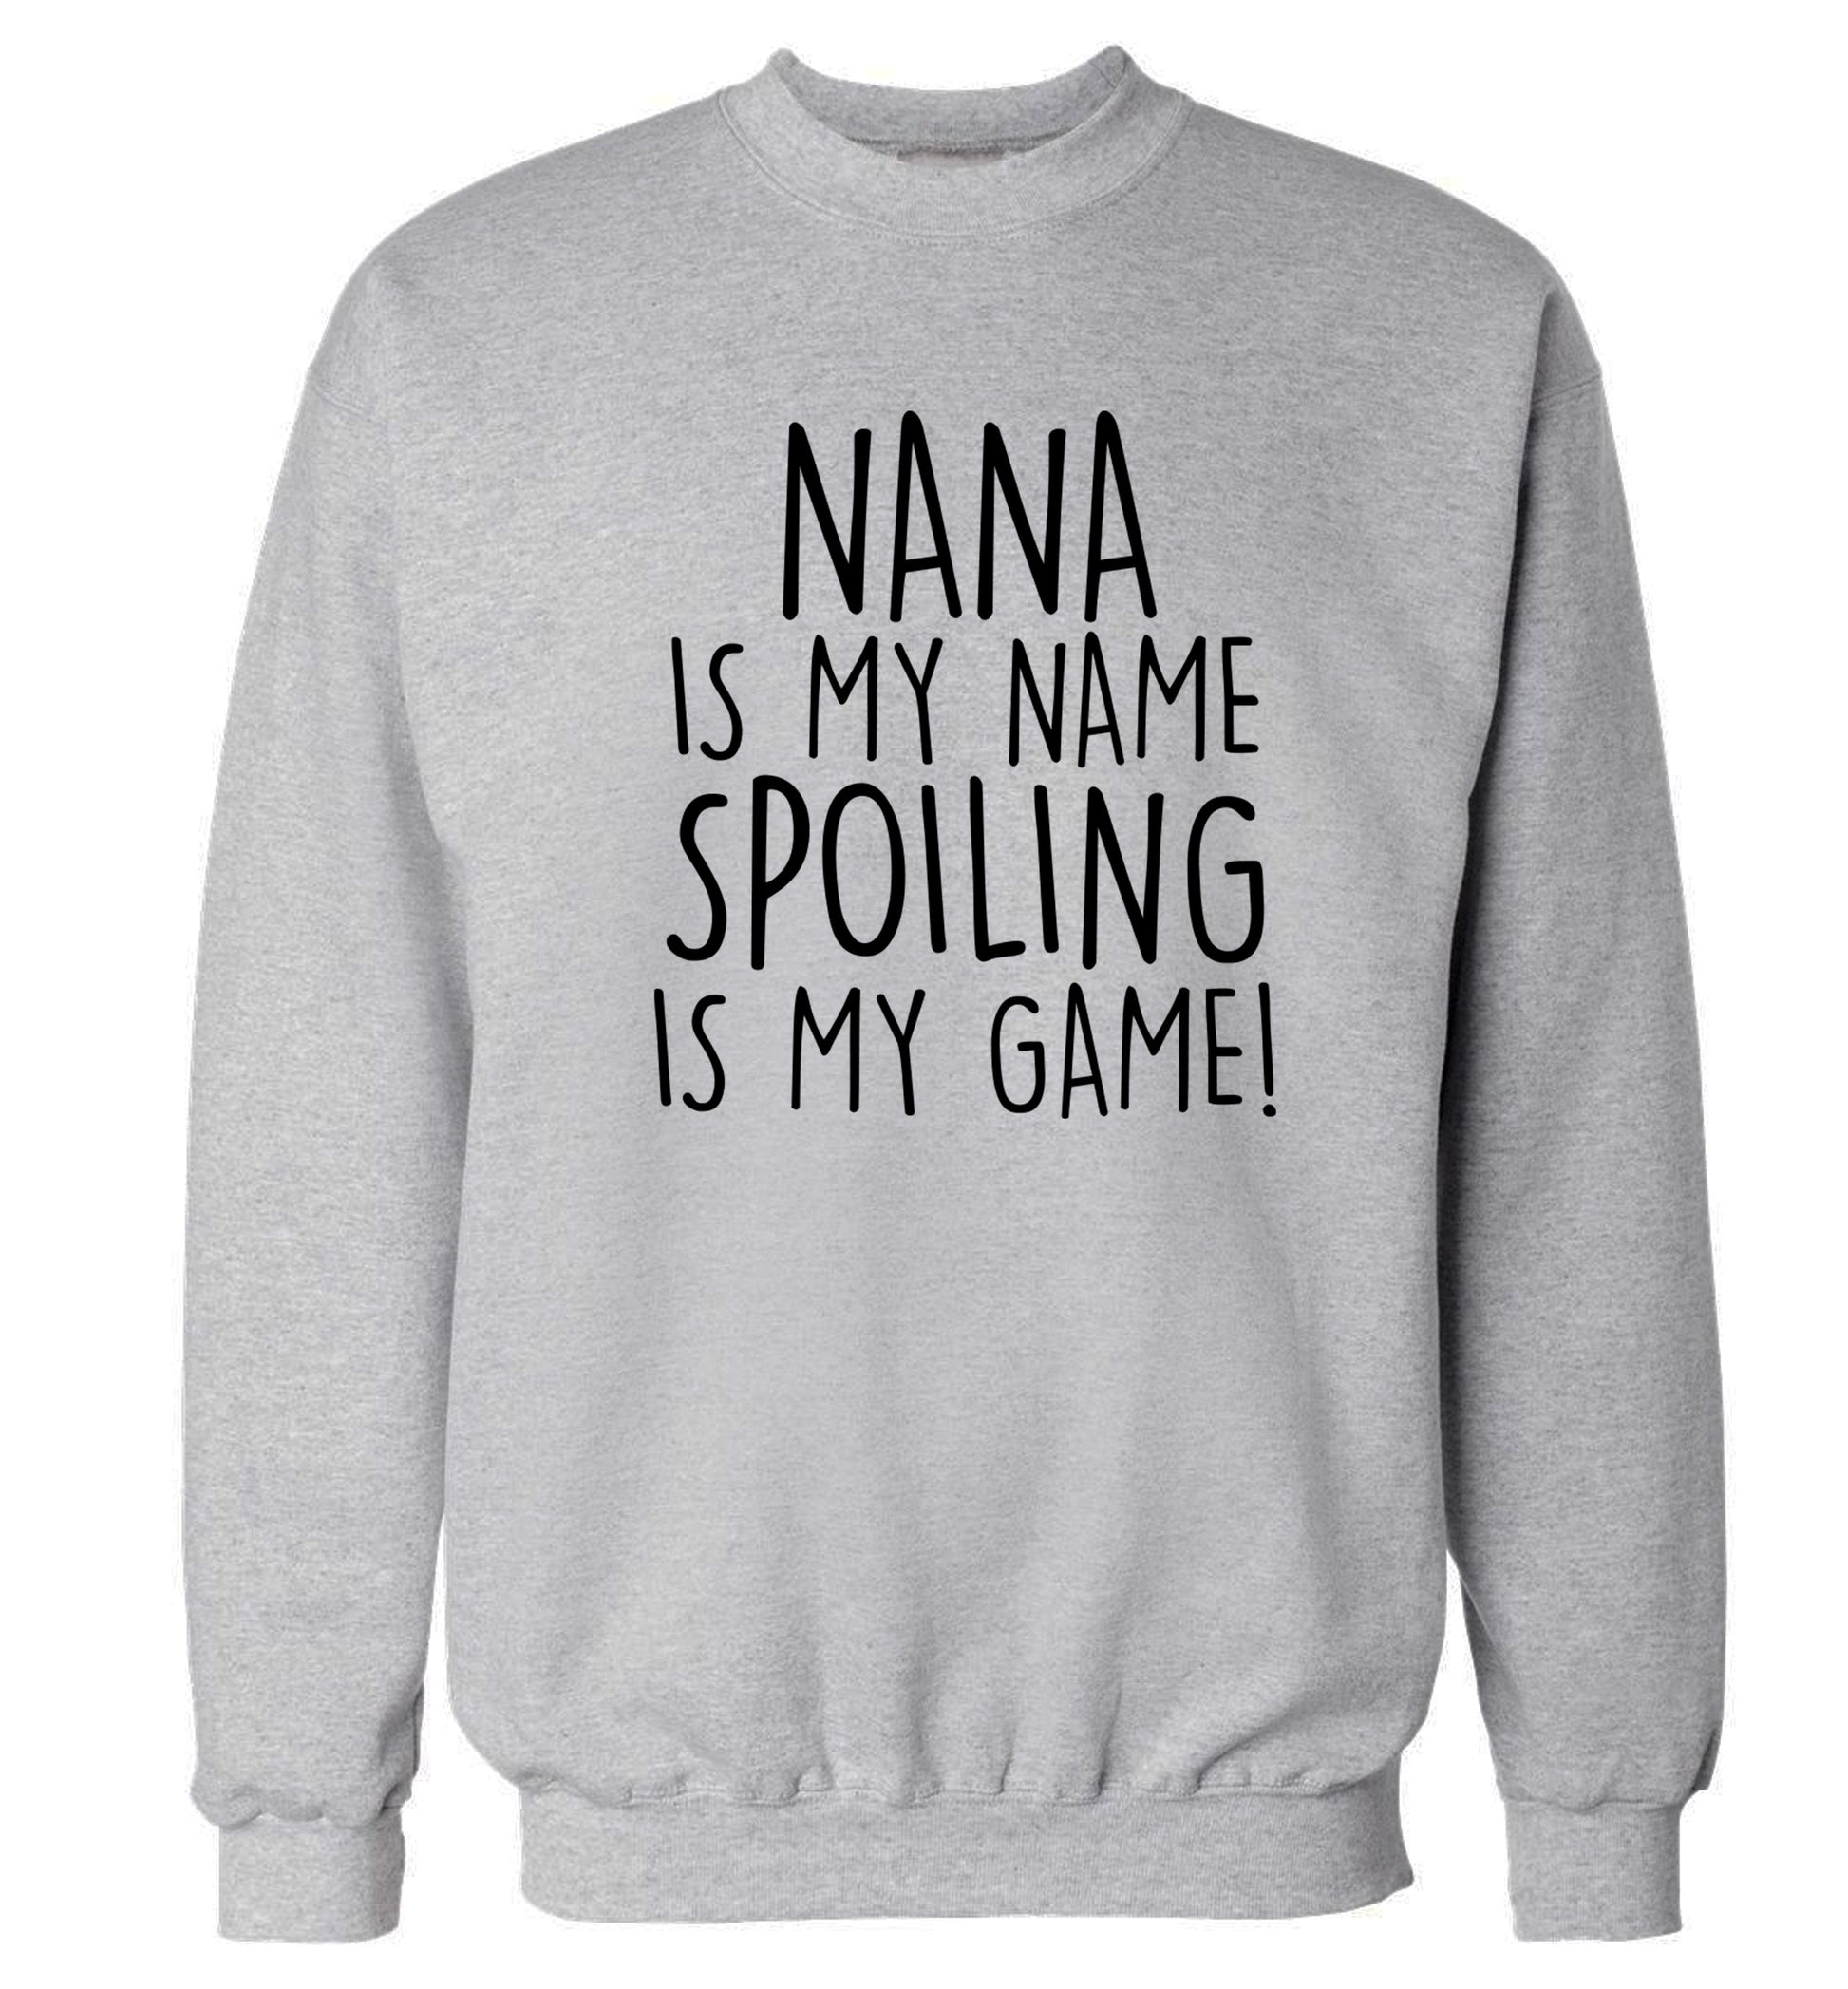 Nana is my name, spoiling is my game Adult's unisex grey Sweater 2XL